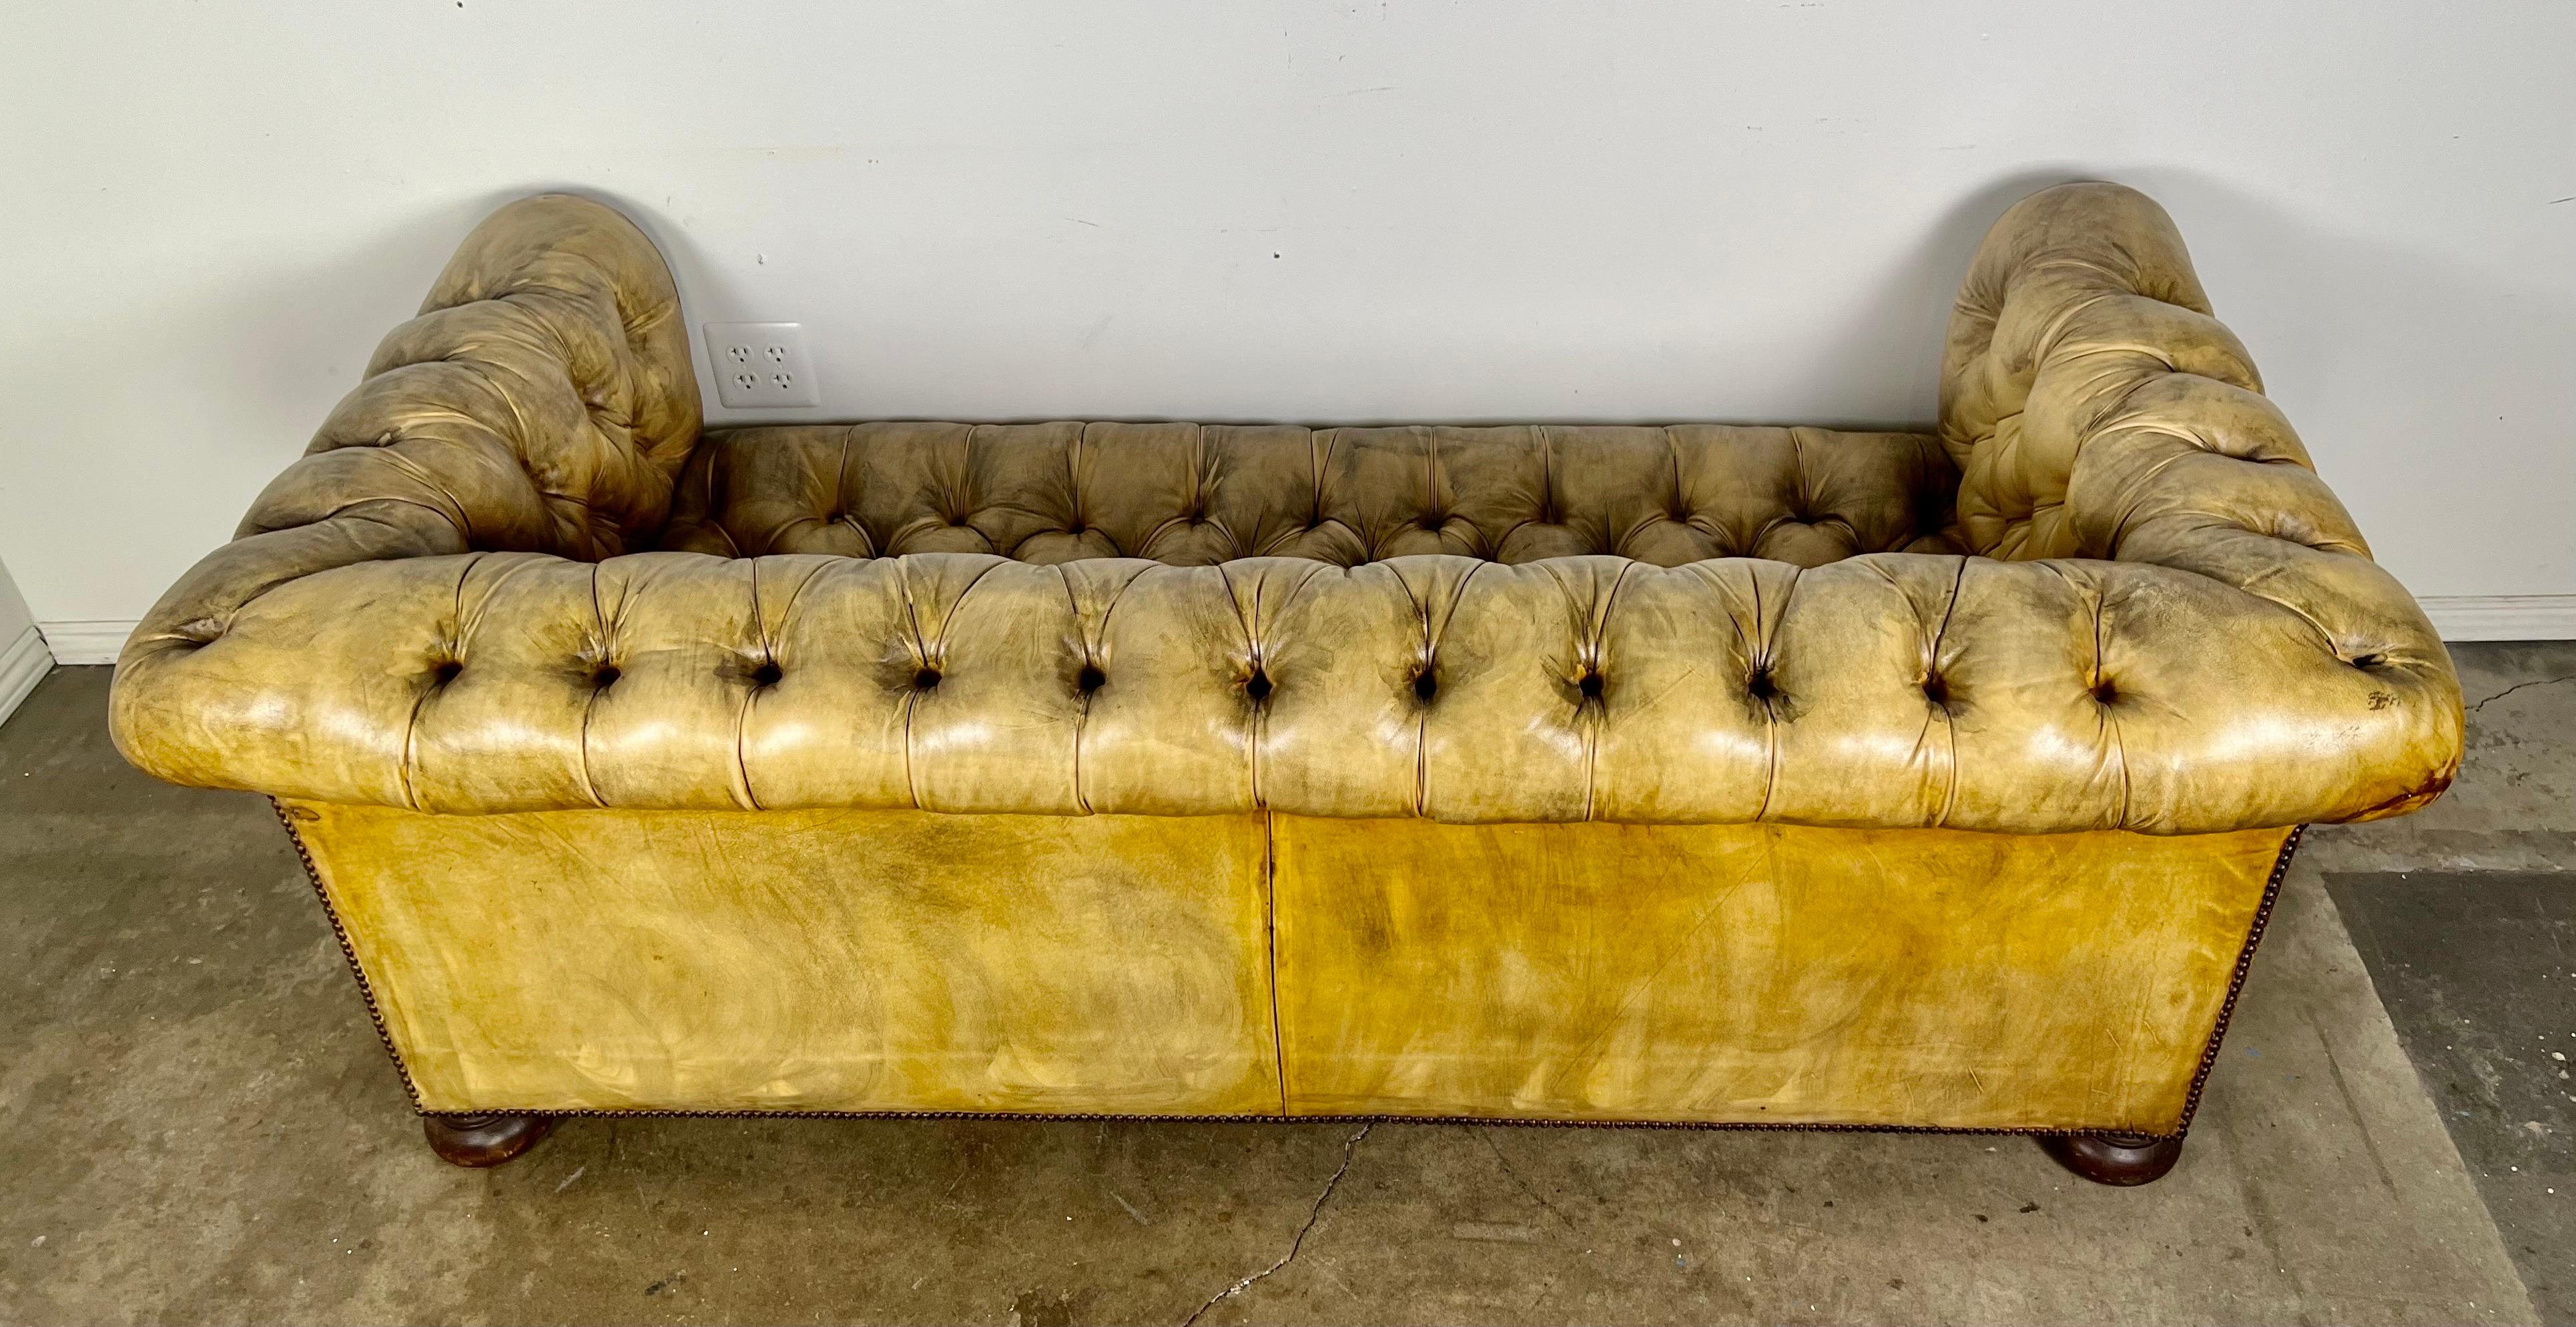 Vintage English Chesterfield Style Leather Tufted Sofa C. 1920's For Sale 12